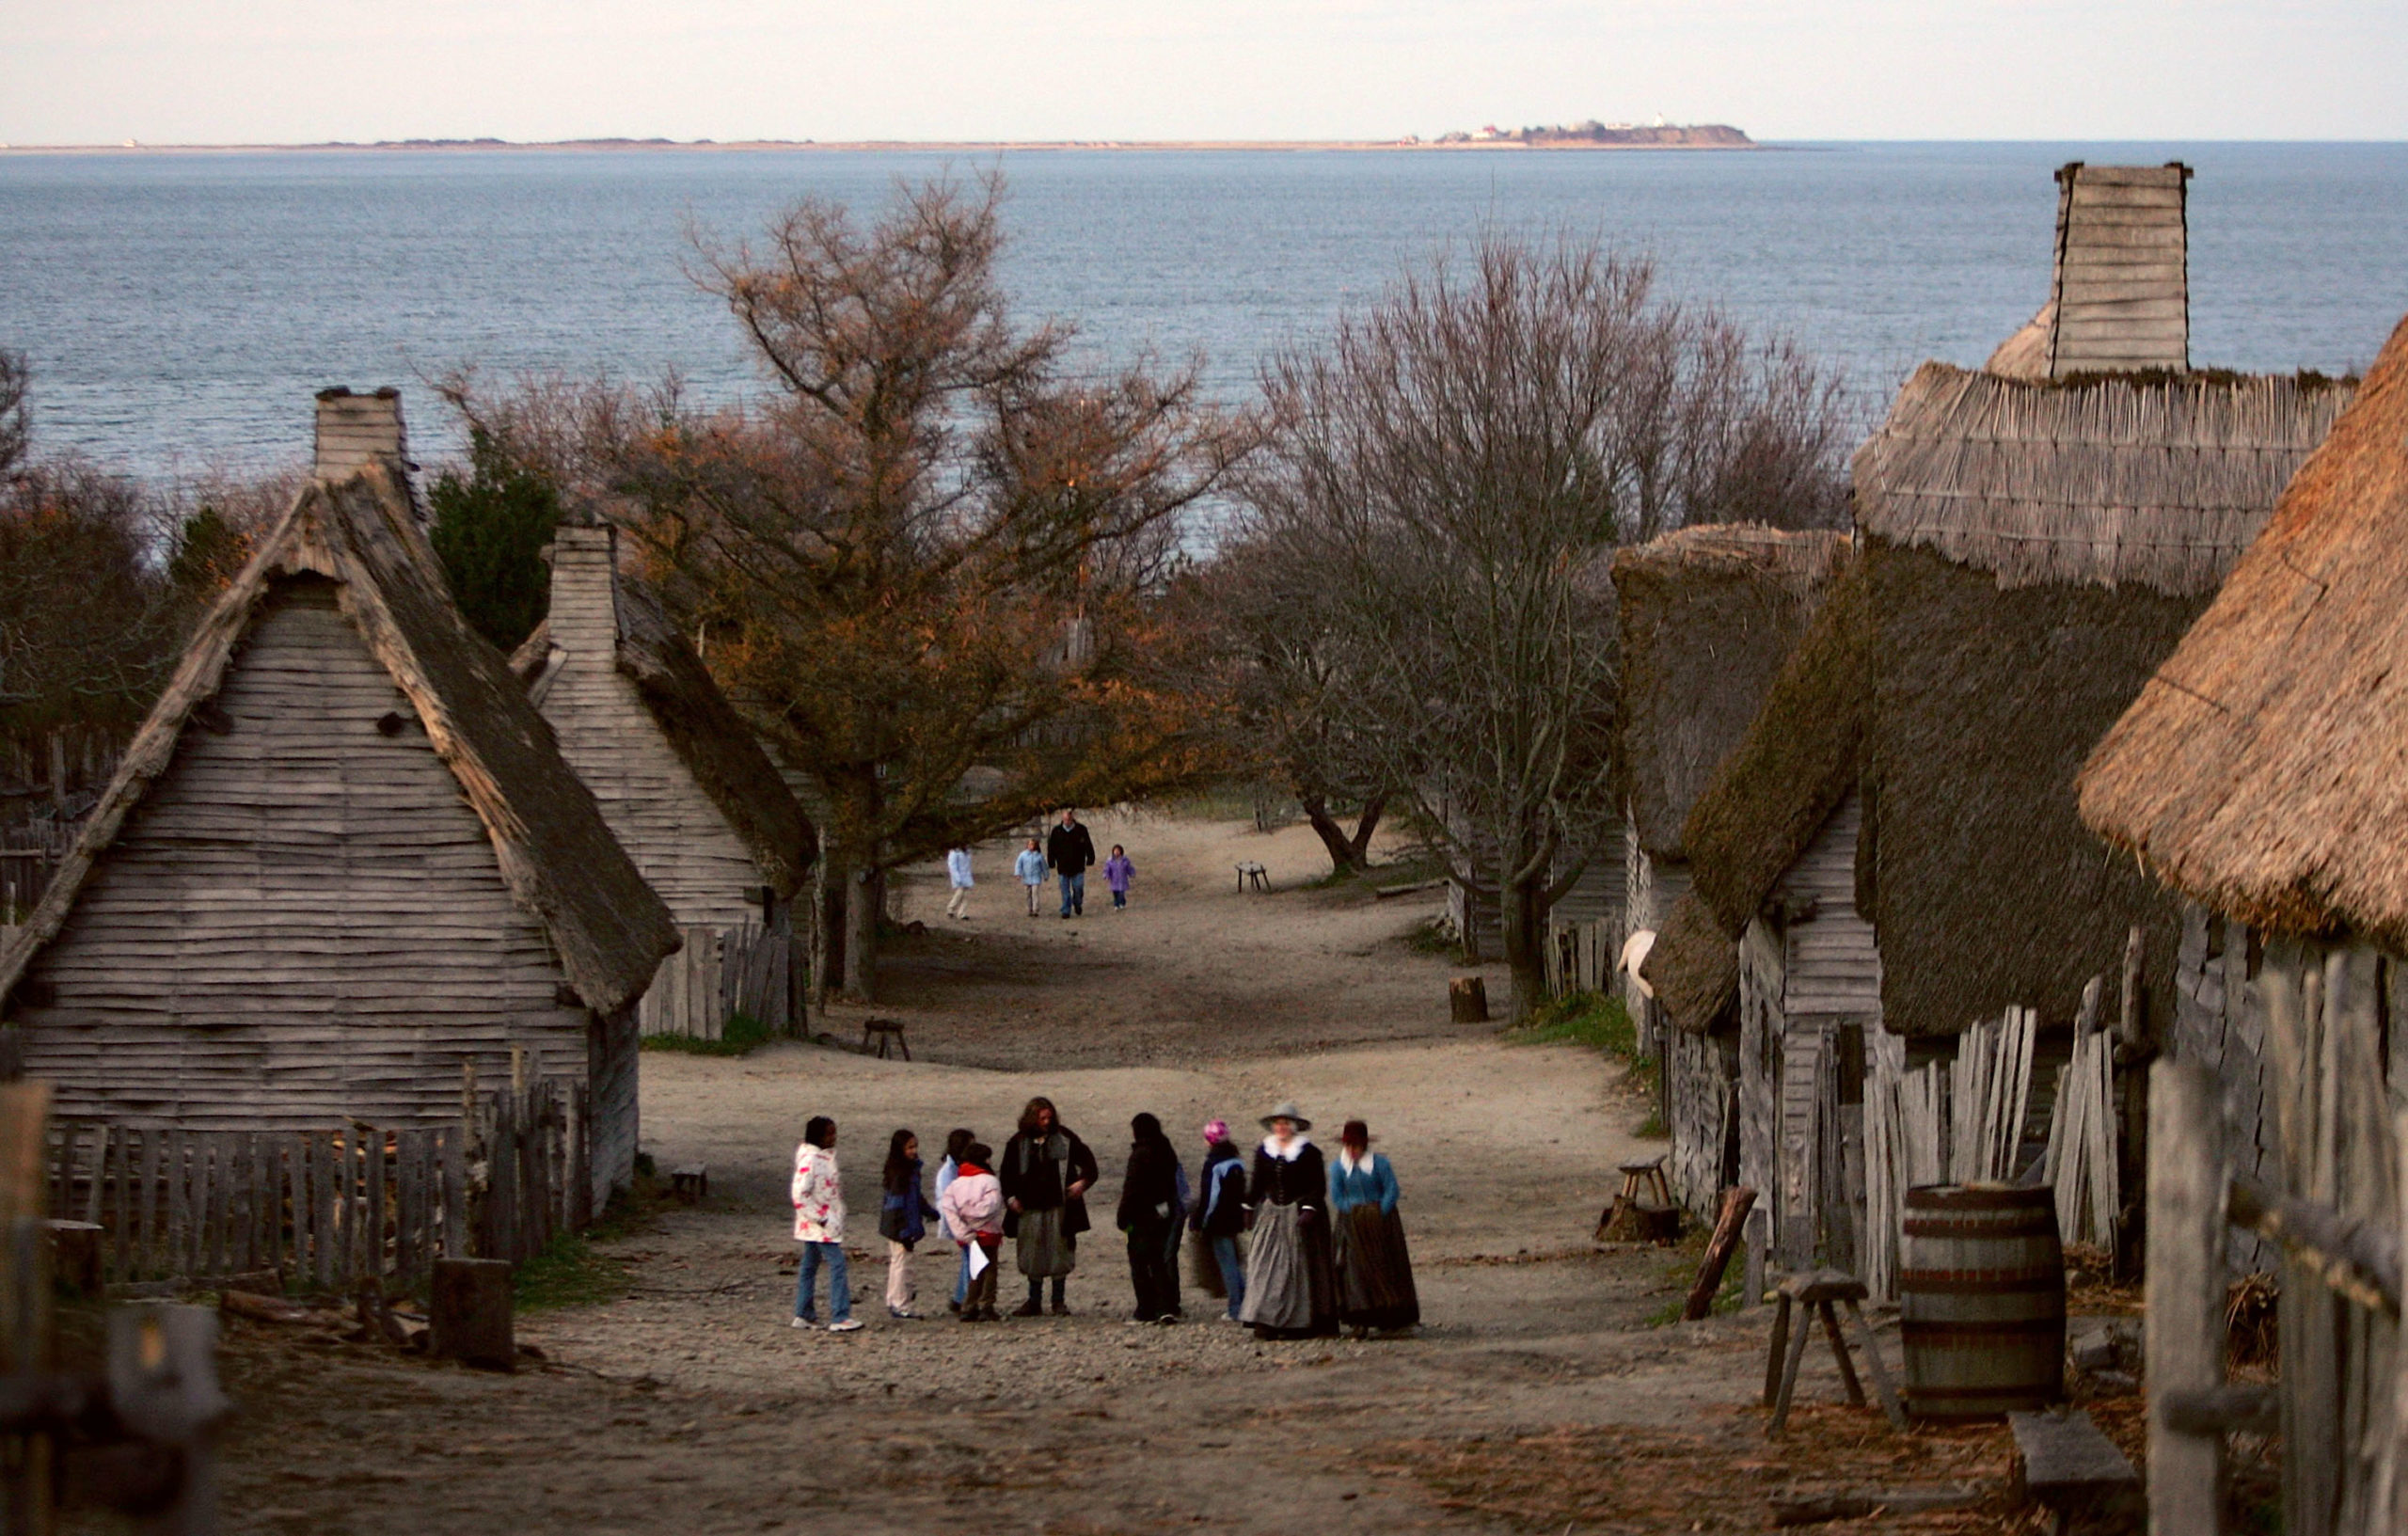 PLYMOUTH, MA - NOVEMBER 17: People visit the 1627 Pilgrim Village at "Plimoth Plantation" where role-players portray Pilgrims seven years after the arrival of the Mayflower November 17, 2005 in Plymouth, Massachusetts. The 17th century replica village was the site of the first Thanksgiving in 1623. Thanksgiving Day, believed to have originally taken place at the end of July, was established as a national holiday by U.S. President Abraham Lincoln in 1863 and is celebrated on the last Thursday of November. (Photo by Joe Raedle/Getty Images)